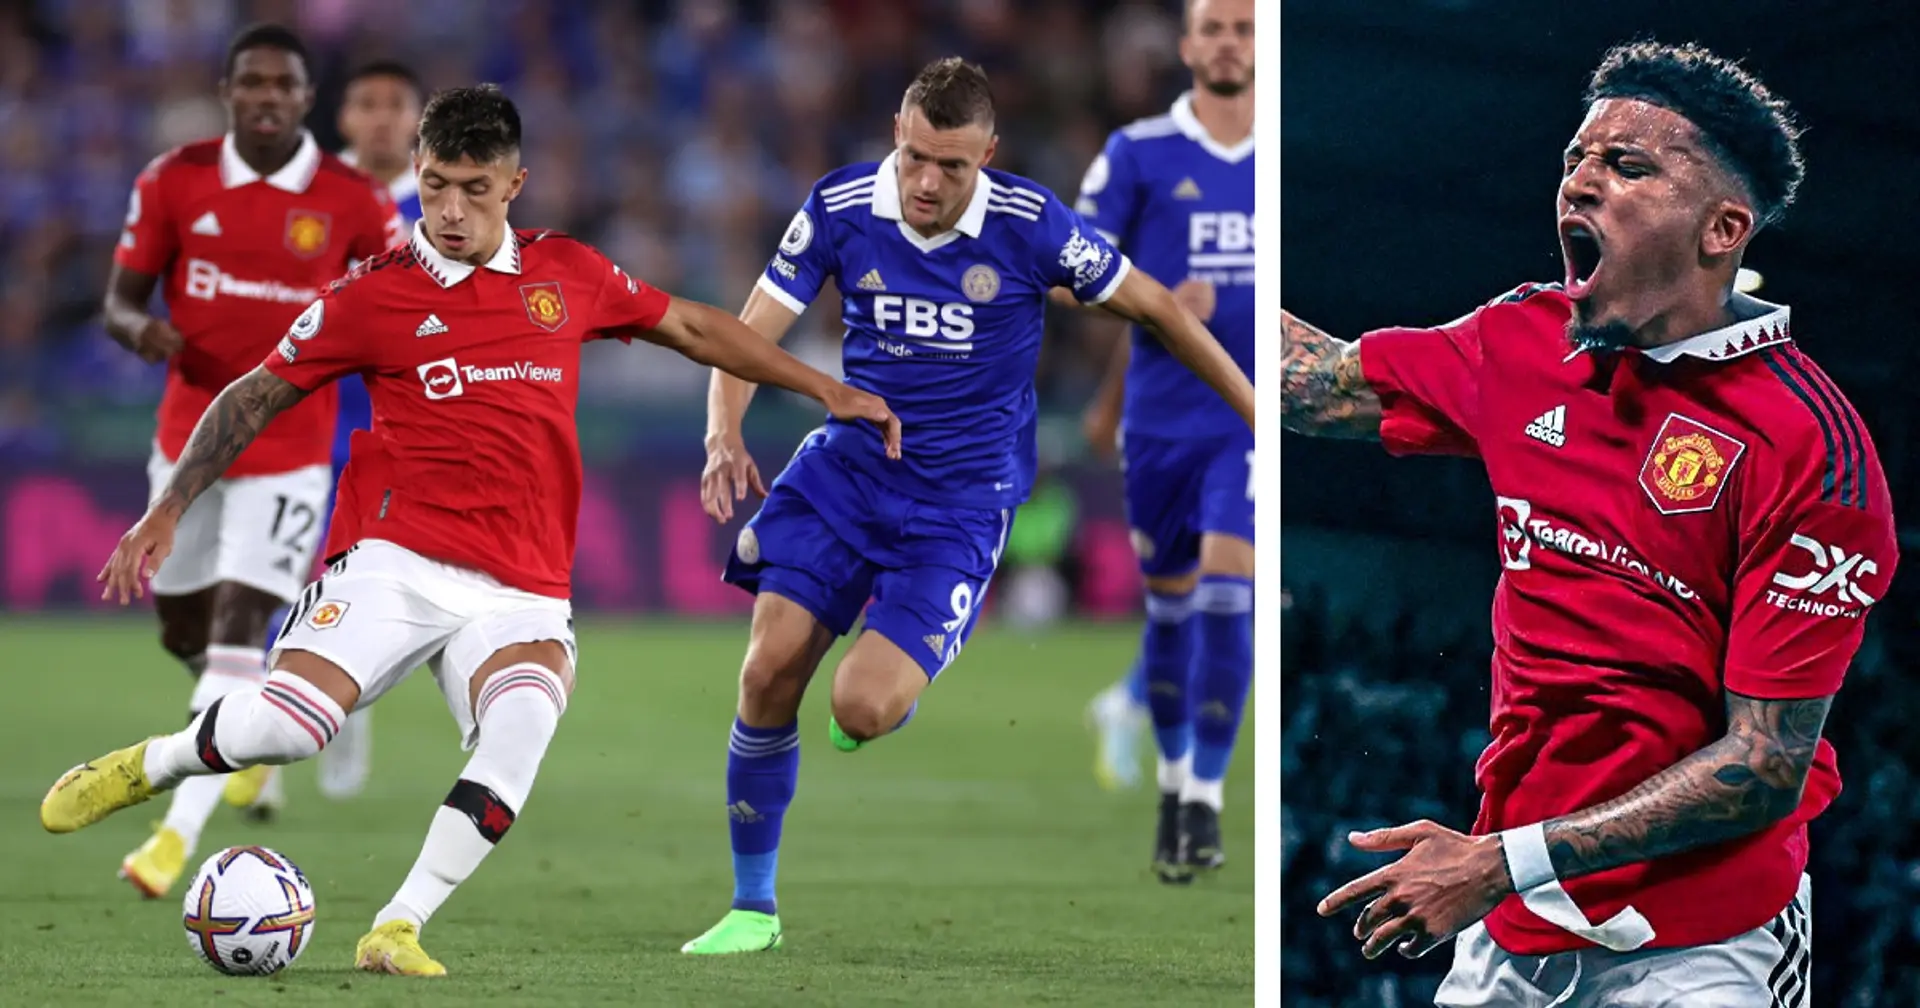 Leicester City 0-1 Man United, FT. LIVE updates, reactions, stats, ratings & more